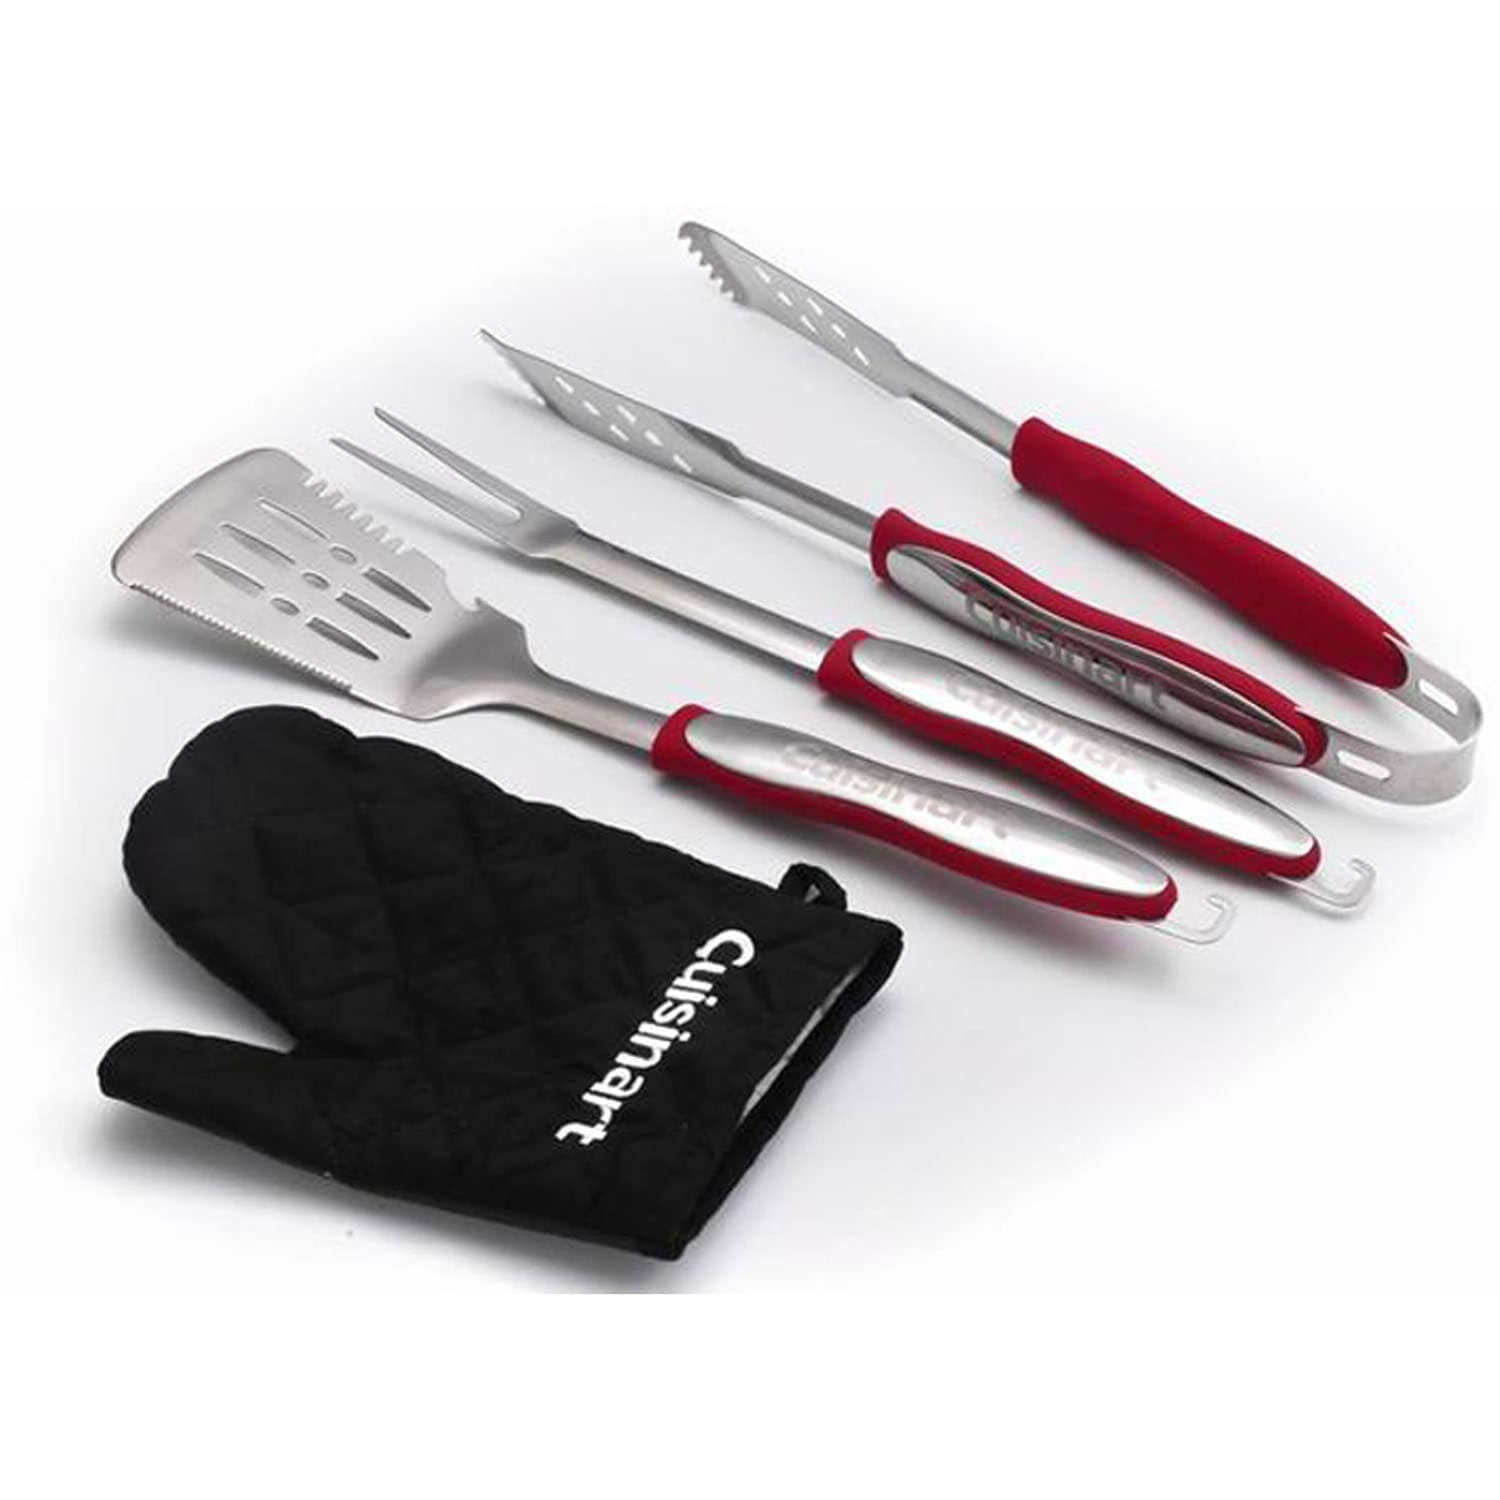 https://ak1.ostkcdn.com/images/products/is/images/direct/10dad4973689351b1f6eb99e594f594bd1664518/Cuisinart-3-Piece-Grilling-Tool-Set-with-Grill-Glove%2C-Red-Black.jpg